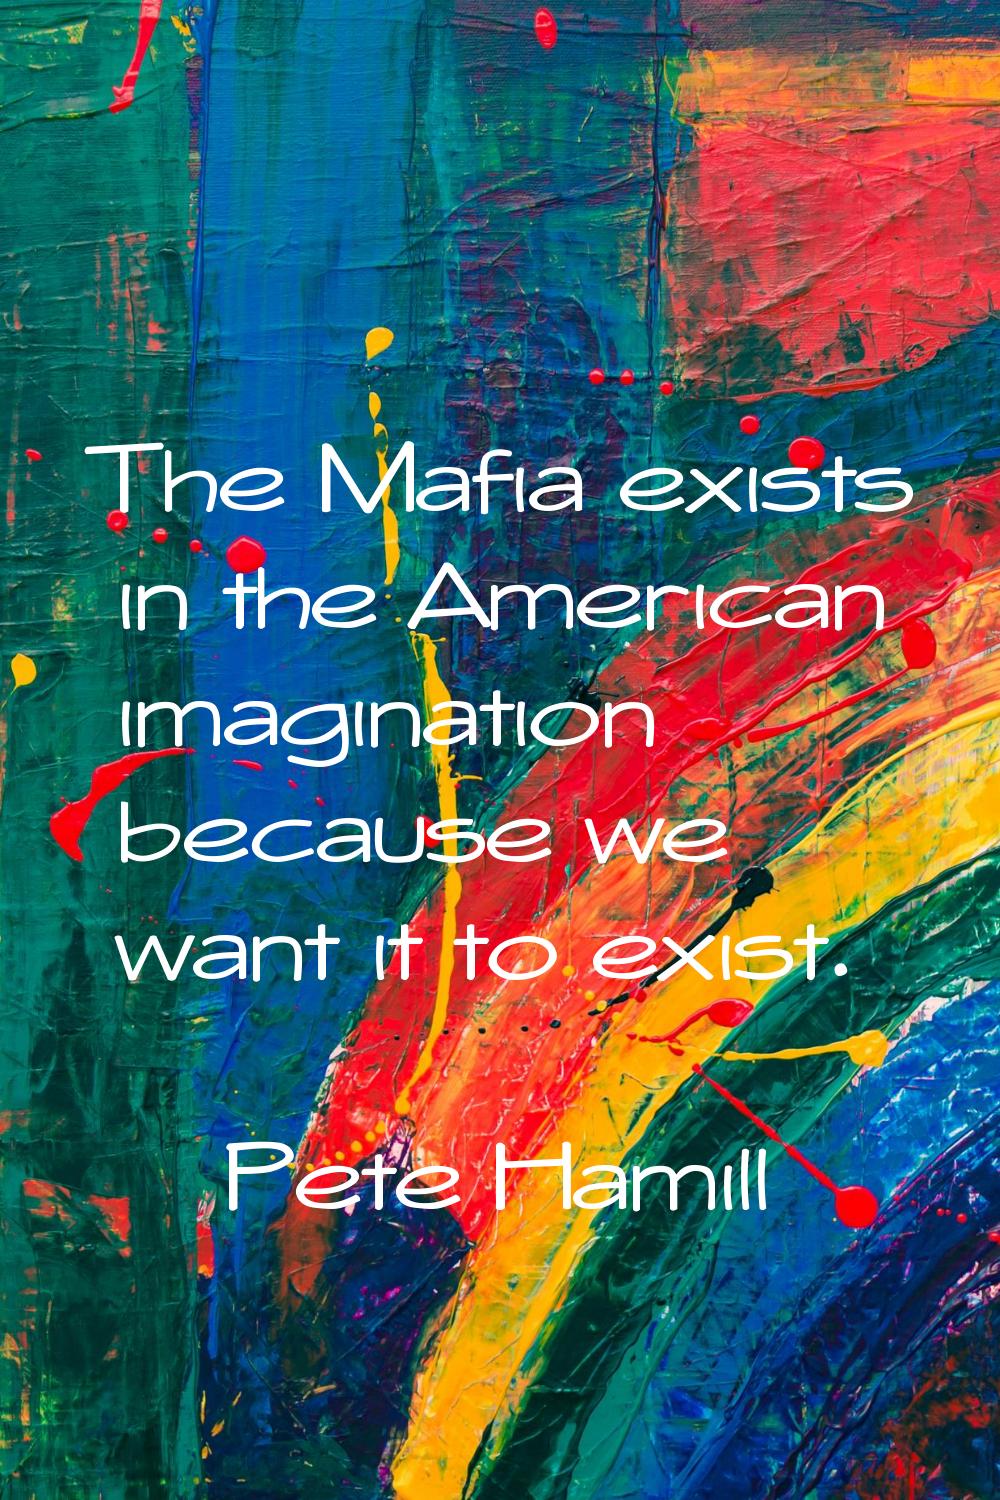 The Mafia exists in the American imagination because we want it to exist.